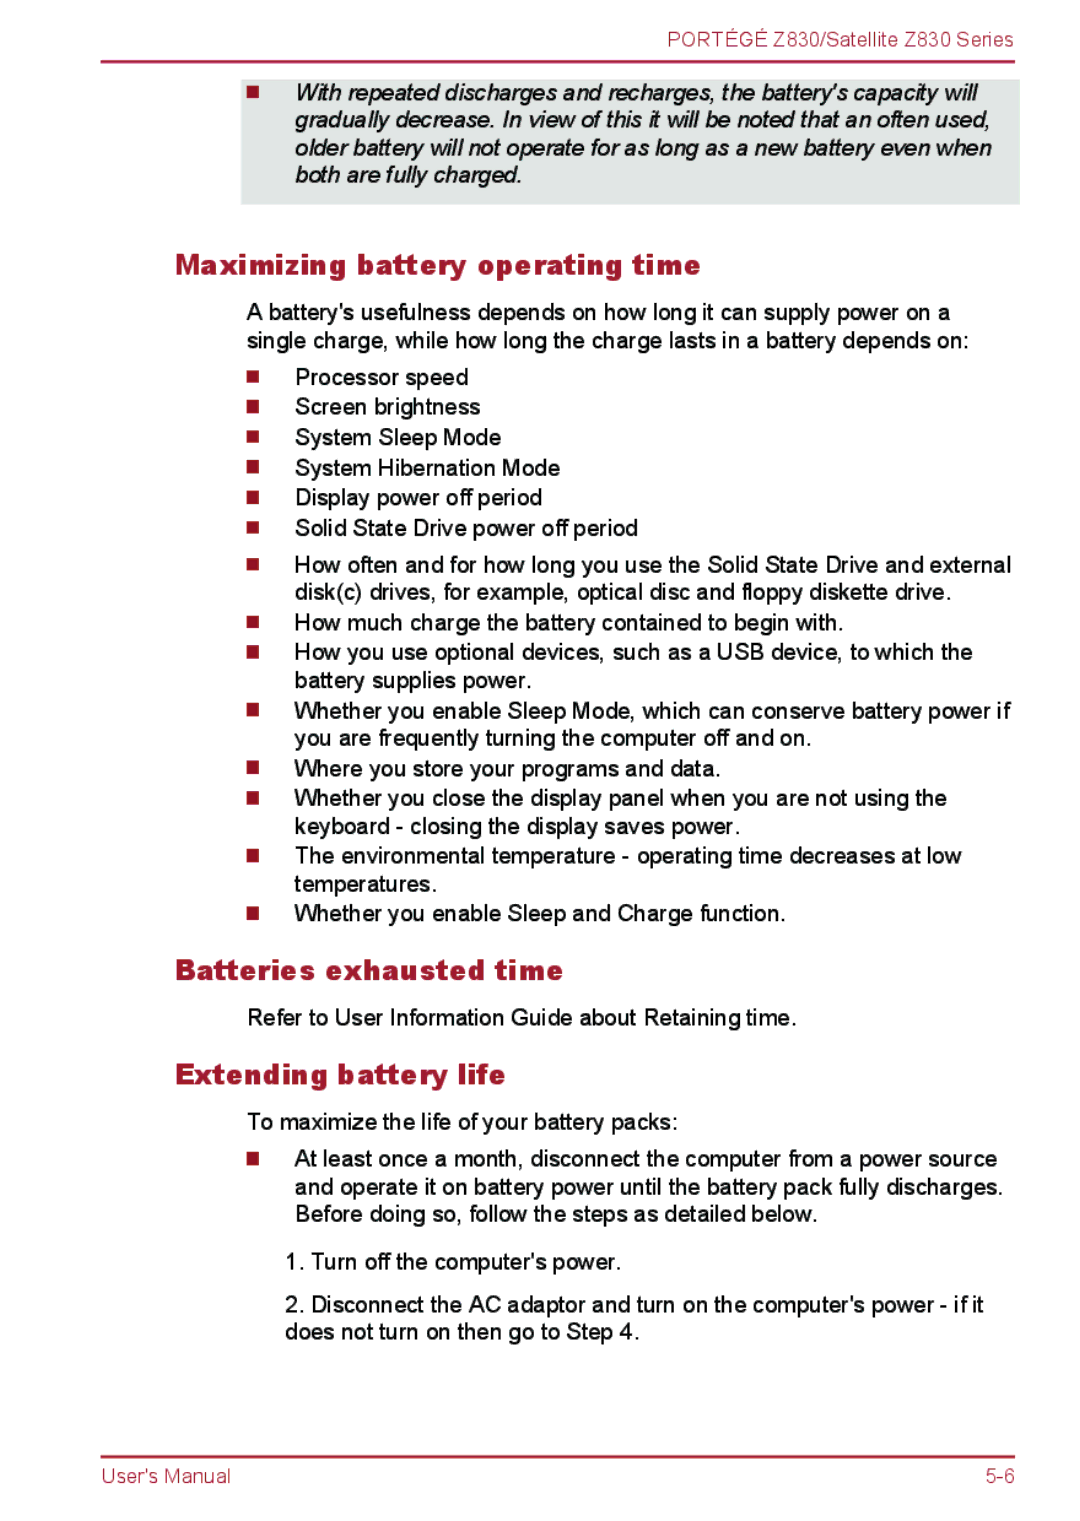 Toshiba Z830 user manual Maximizing battery operating time, Batteries exhausted time, Extending battery life 